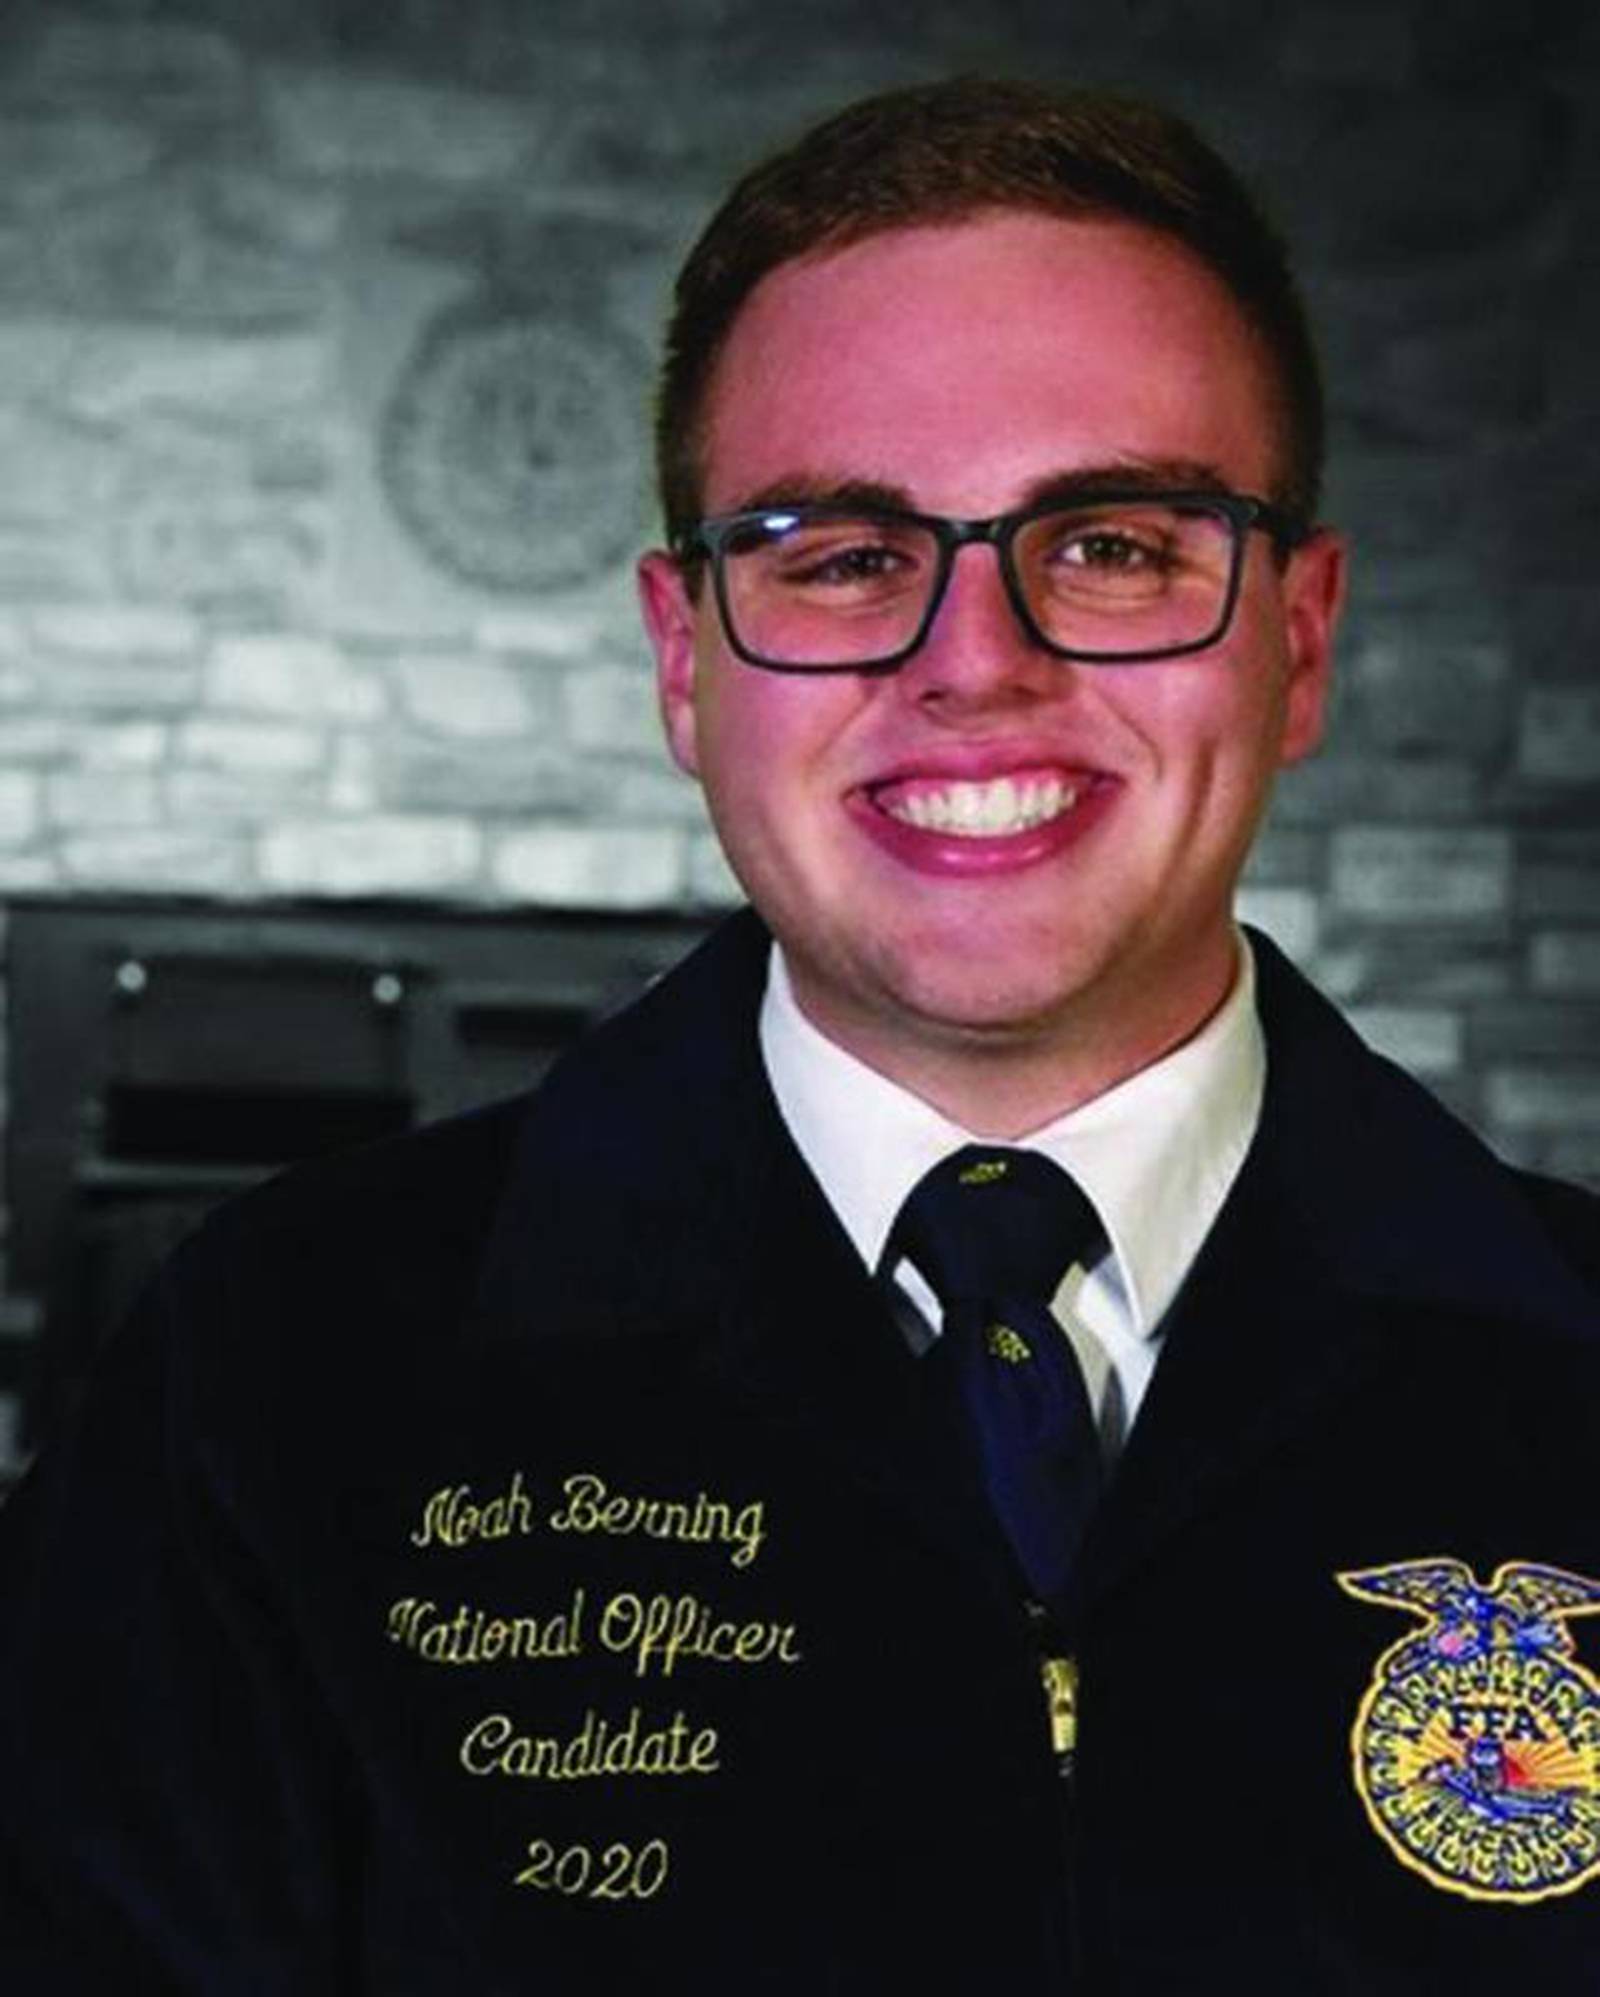 Indiana FFA 'proud' of national officer candidate AgriNews